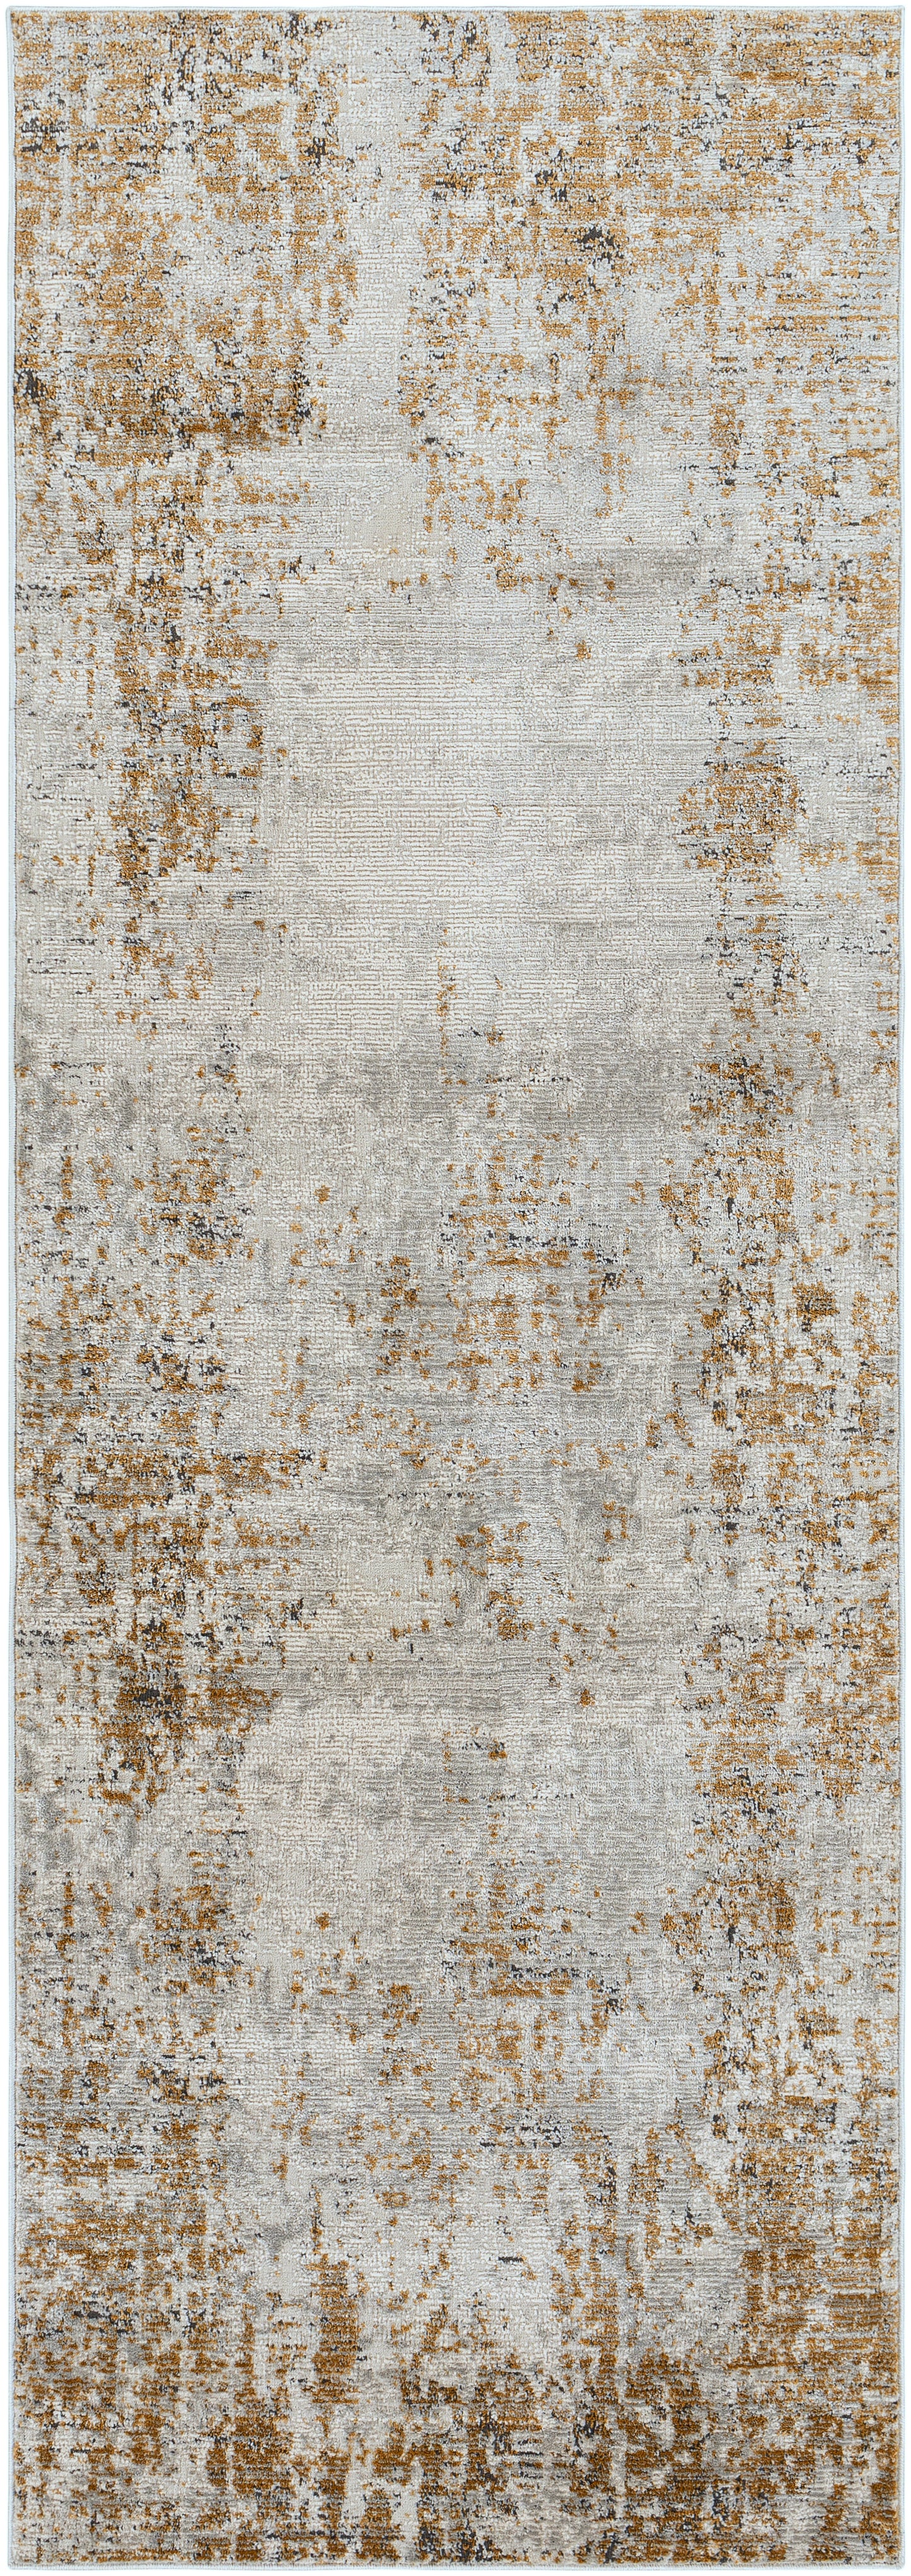 Alpine 30593 Machine Woven Synthetic Blend Indoor Area Rug by Surya Rugs